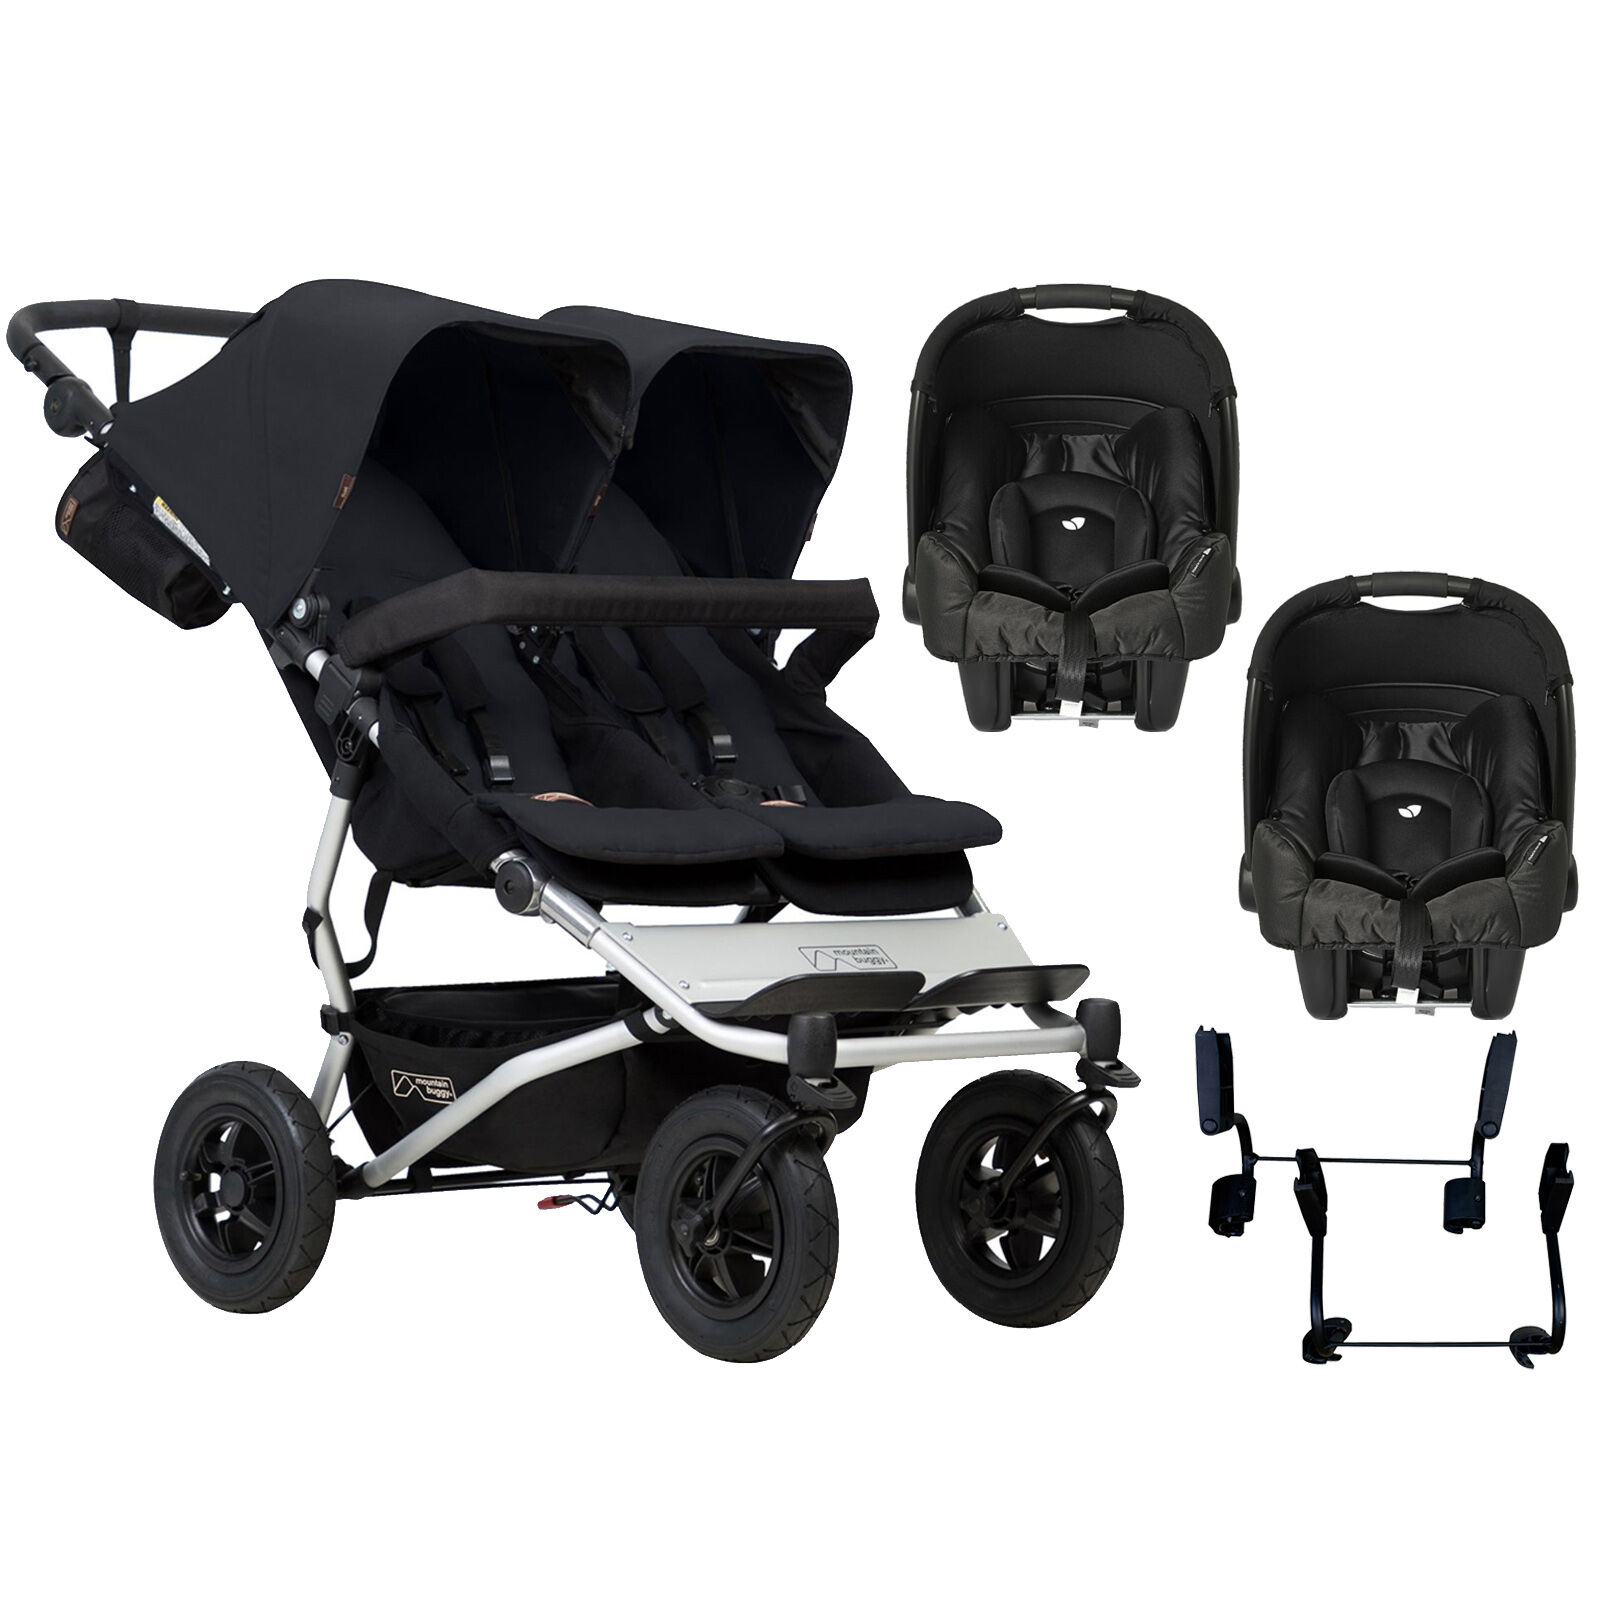 Mountain Buggy Duet V3 Double (Gemm) Travel System - Black